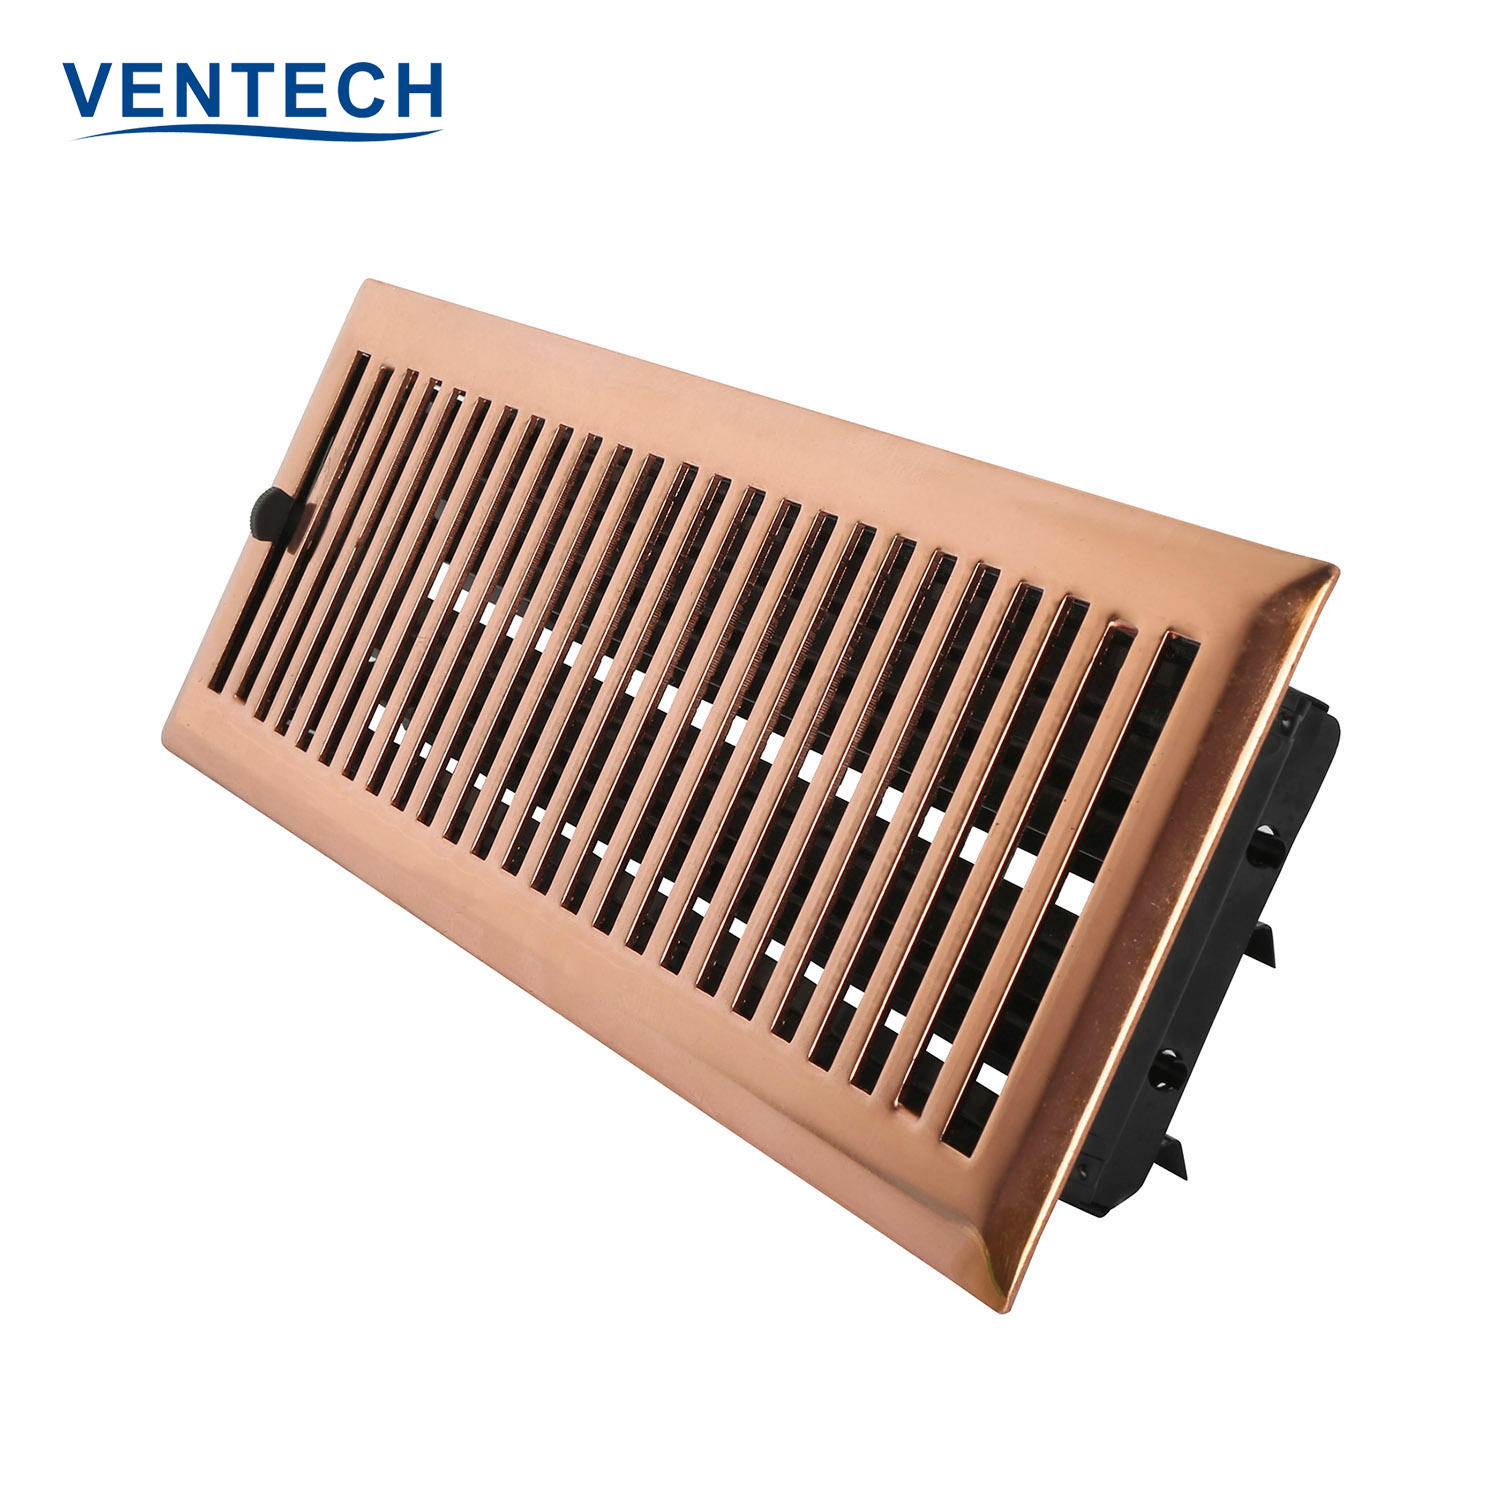 Hvac System Exhaust Air Ducting Aluminum Insulated  Flexible Air Duct Floor Grilles For Ventilation